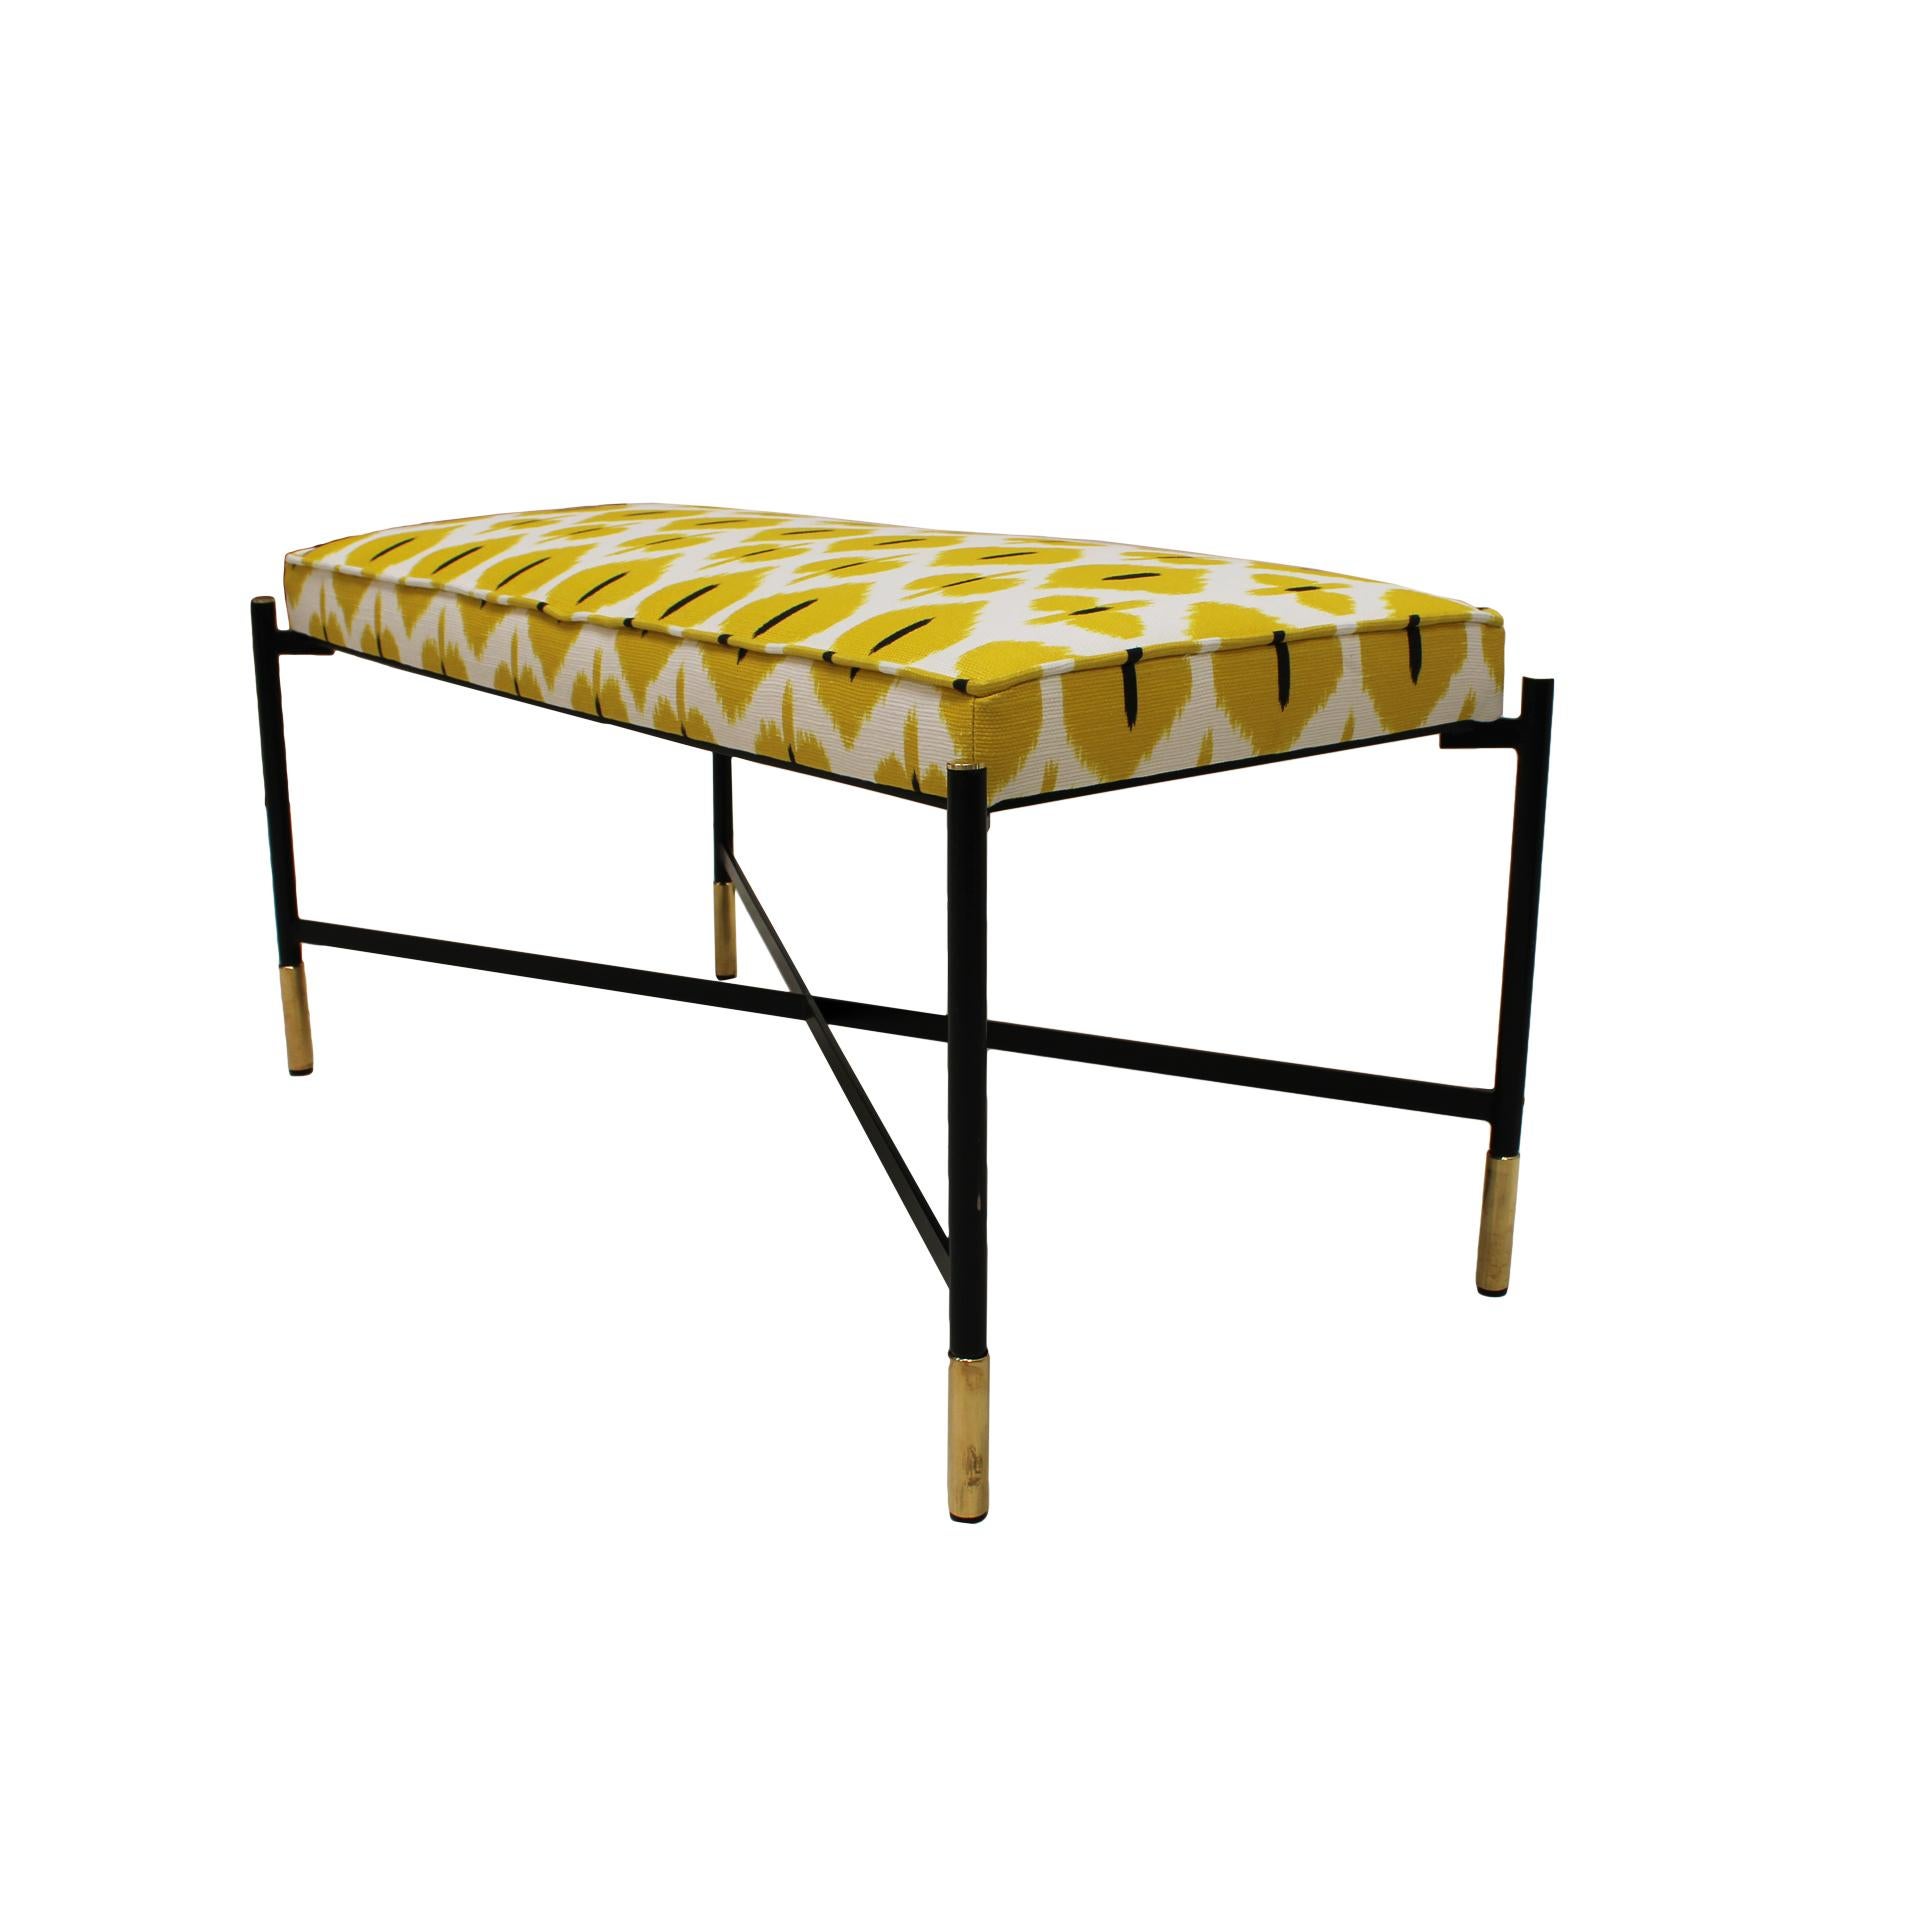 Mid-Century Modern Modern Black Lacquered Iron and Patterned Fabric, 1970s Italian Stool For Sale